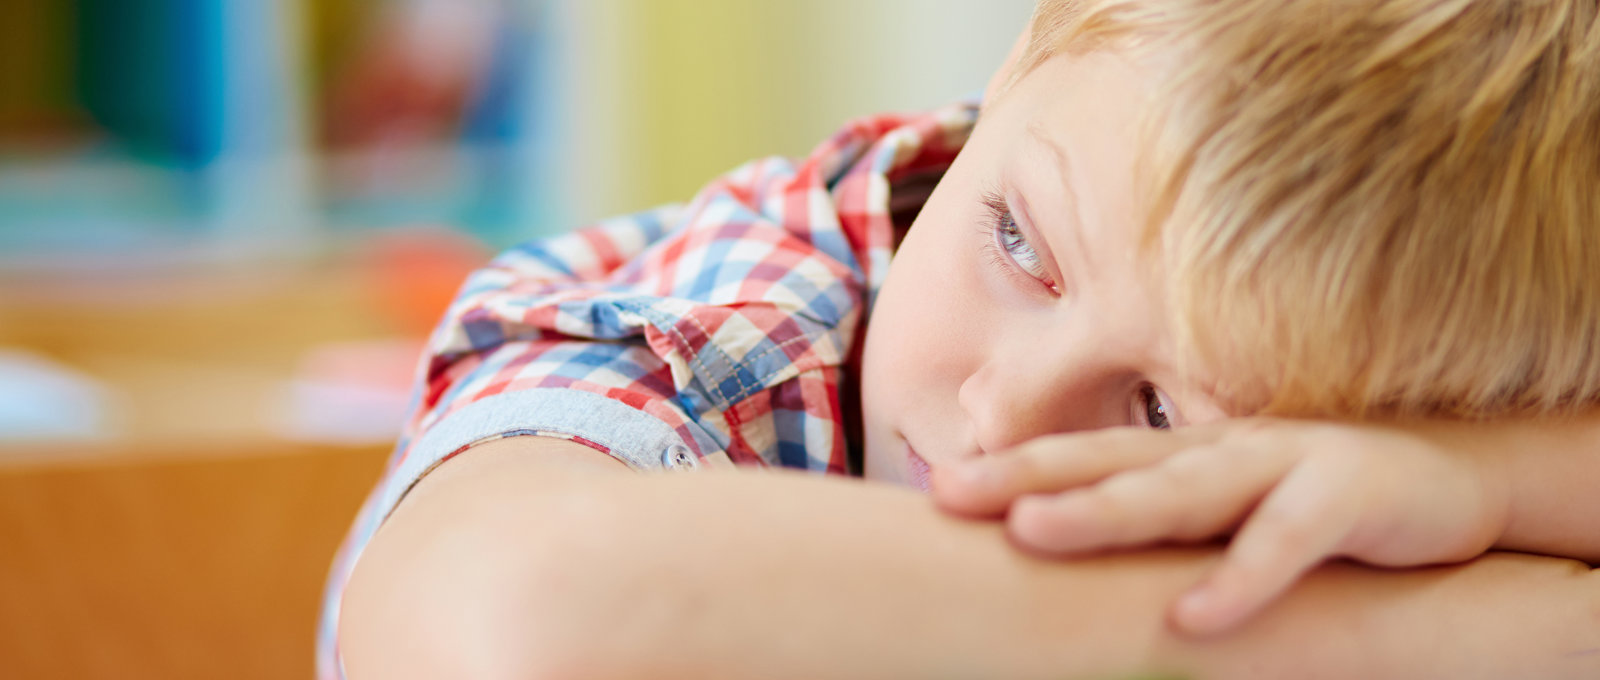 Photograph of a young boy resting his head on his arms on a table and looking sad